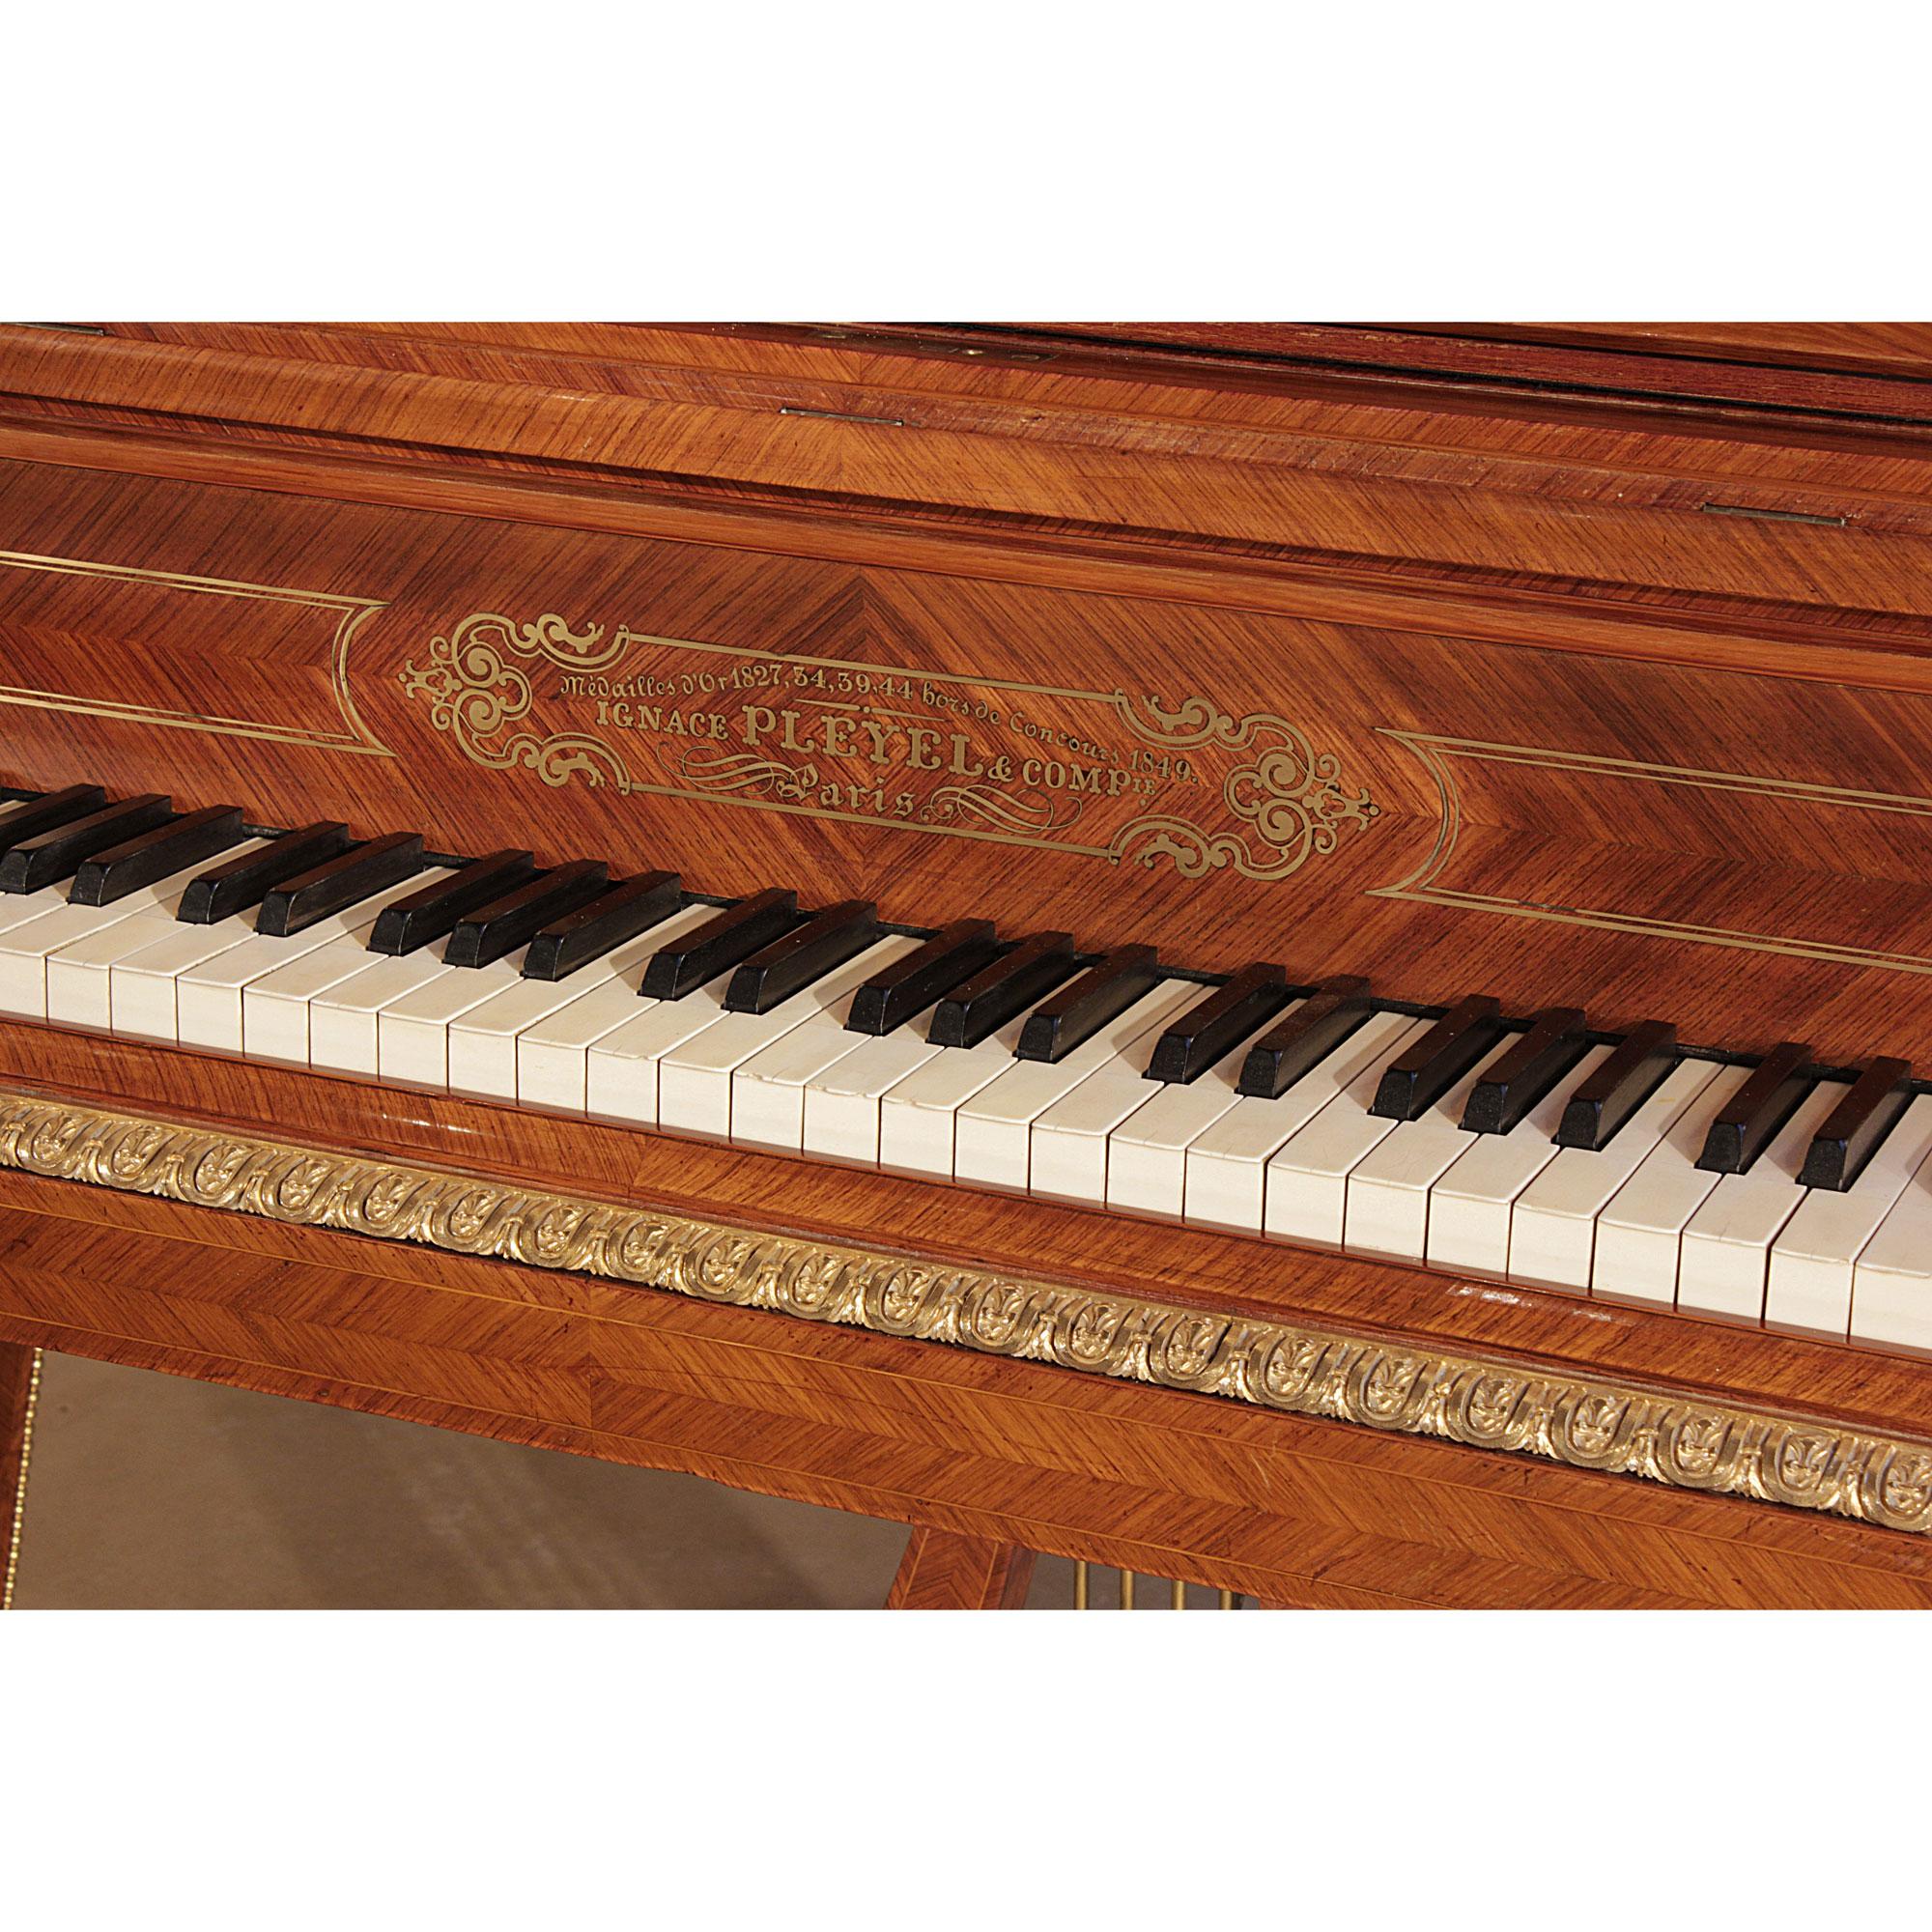 A spectacular French mid-19th century, circa 1855, Louis XVI st. tulipwood parquetry and ormolu mounted, Model 2 Concert Grand Piano, signed Pleyel, Serial Number 21731. The pianoforte is raised on three tapered concave top legs with beaded ormolu